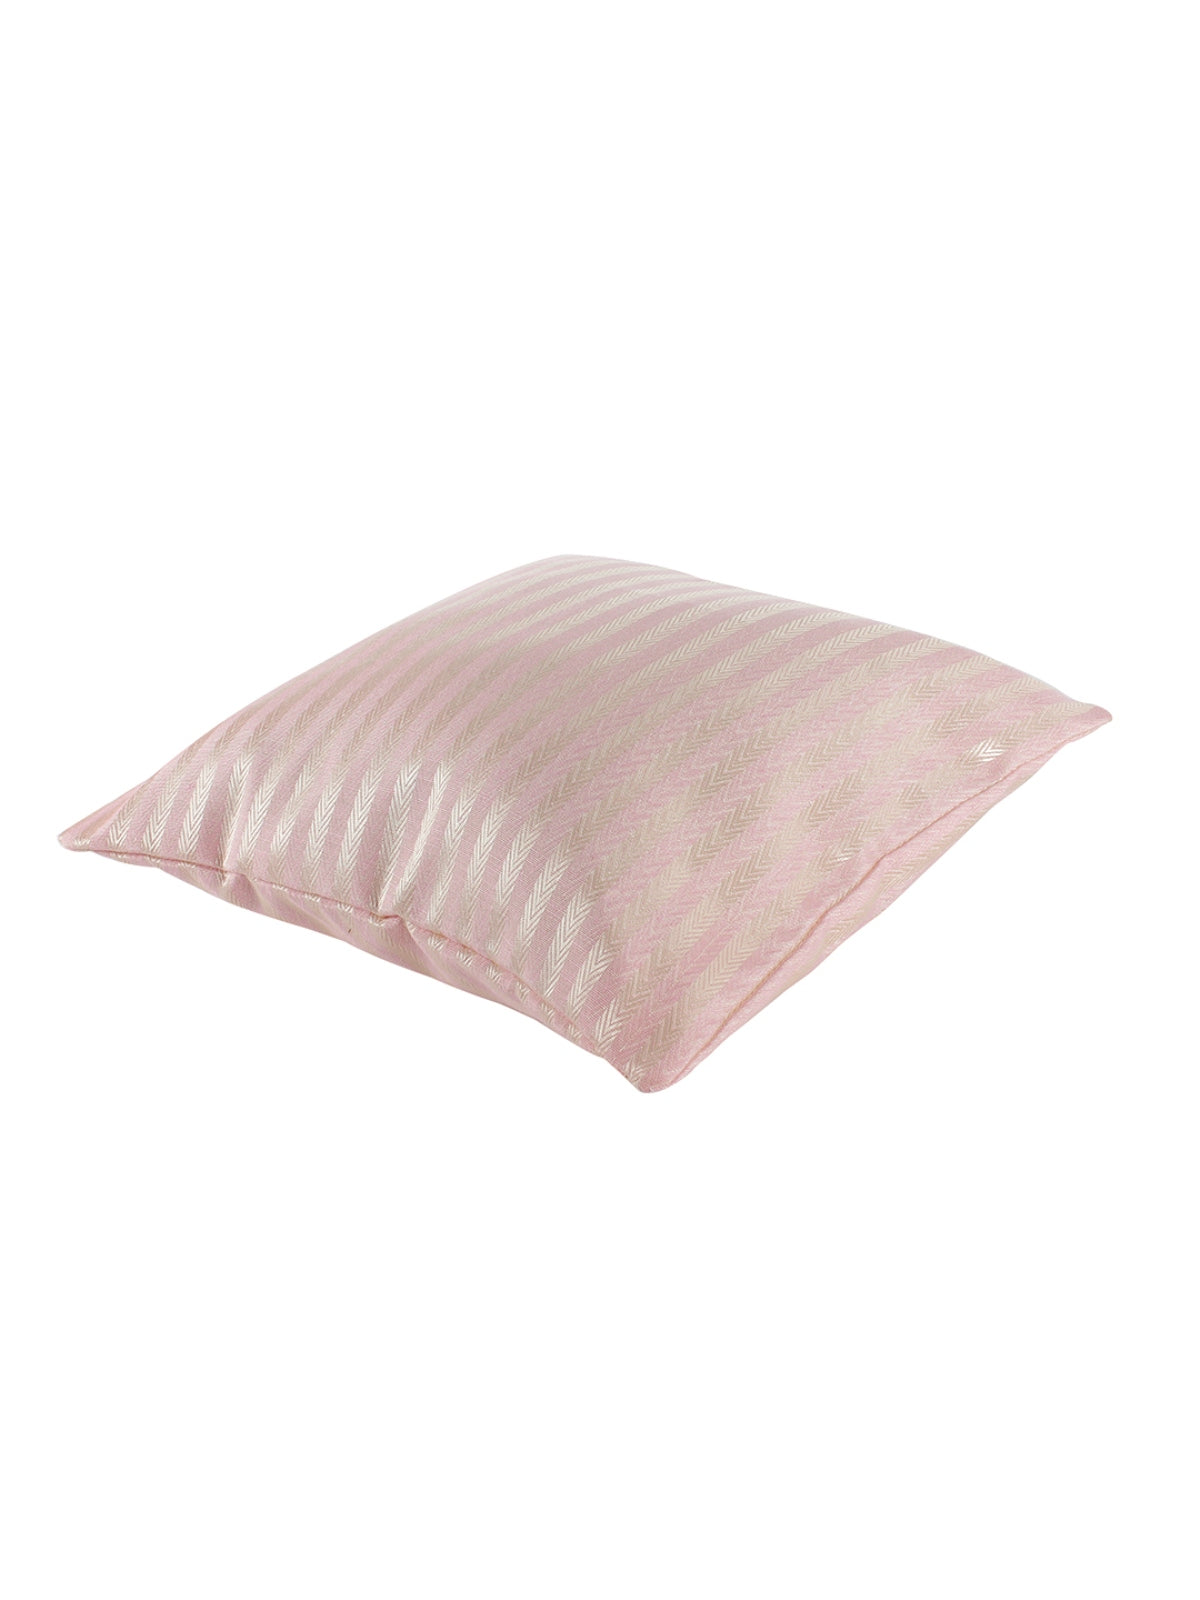 ROMEE Pink Striped Printed Cushion Covers Set of 5